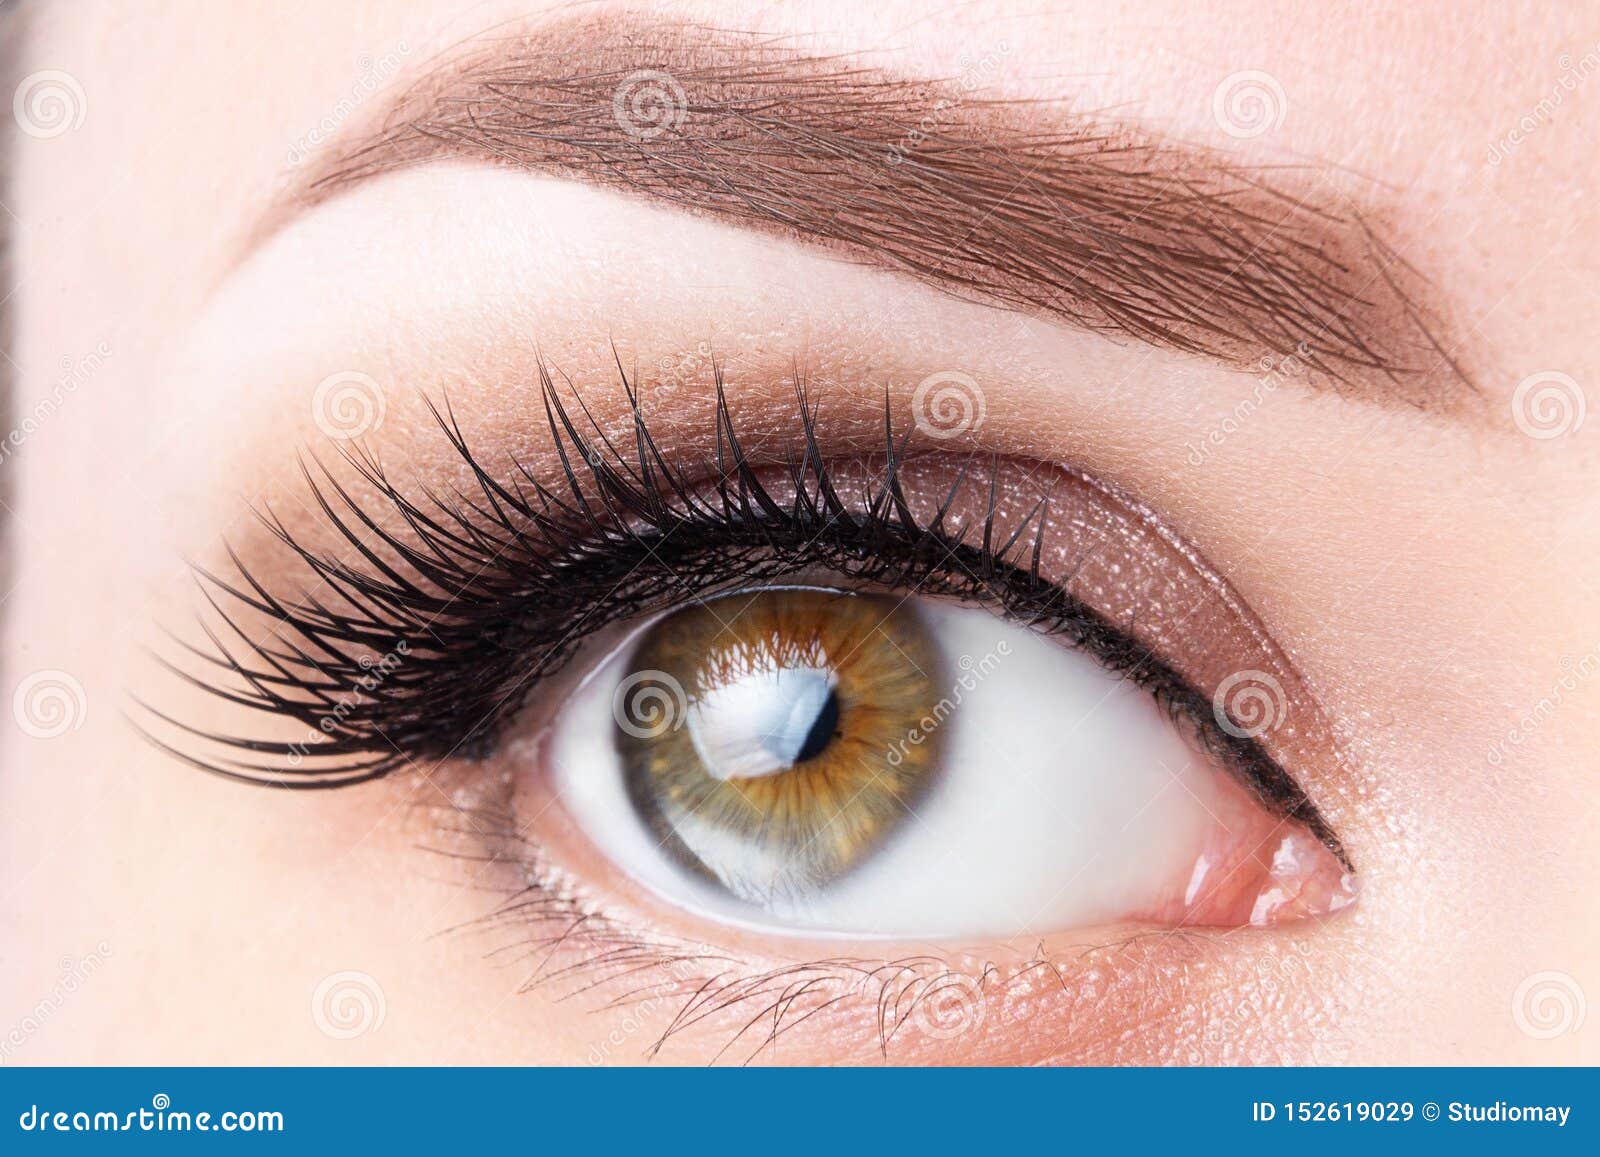 4 582 Eyebrow Tattoo Photos Free Royalty Free Stock Photos From Dreamstime